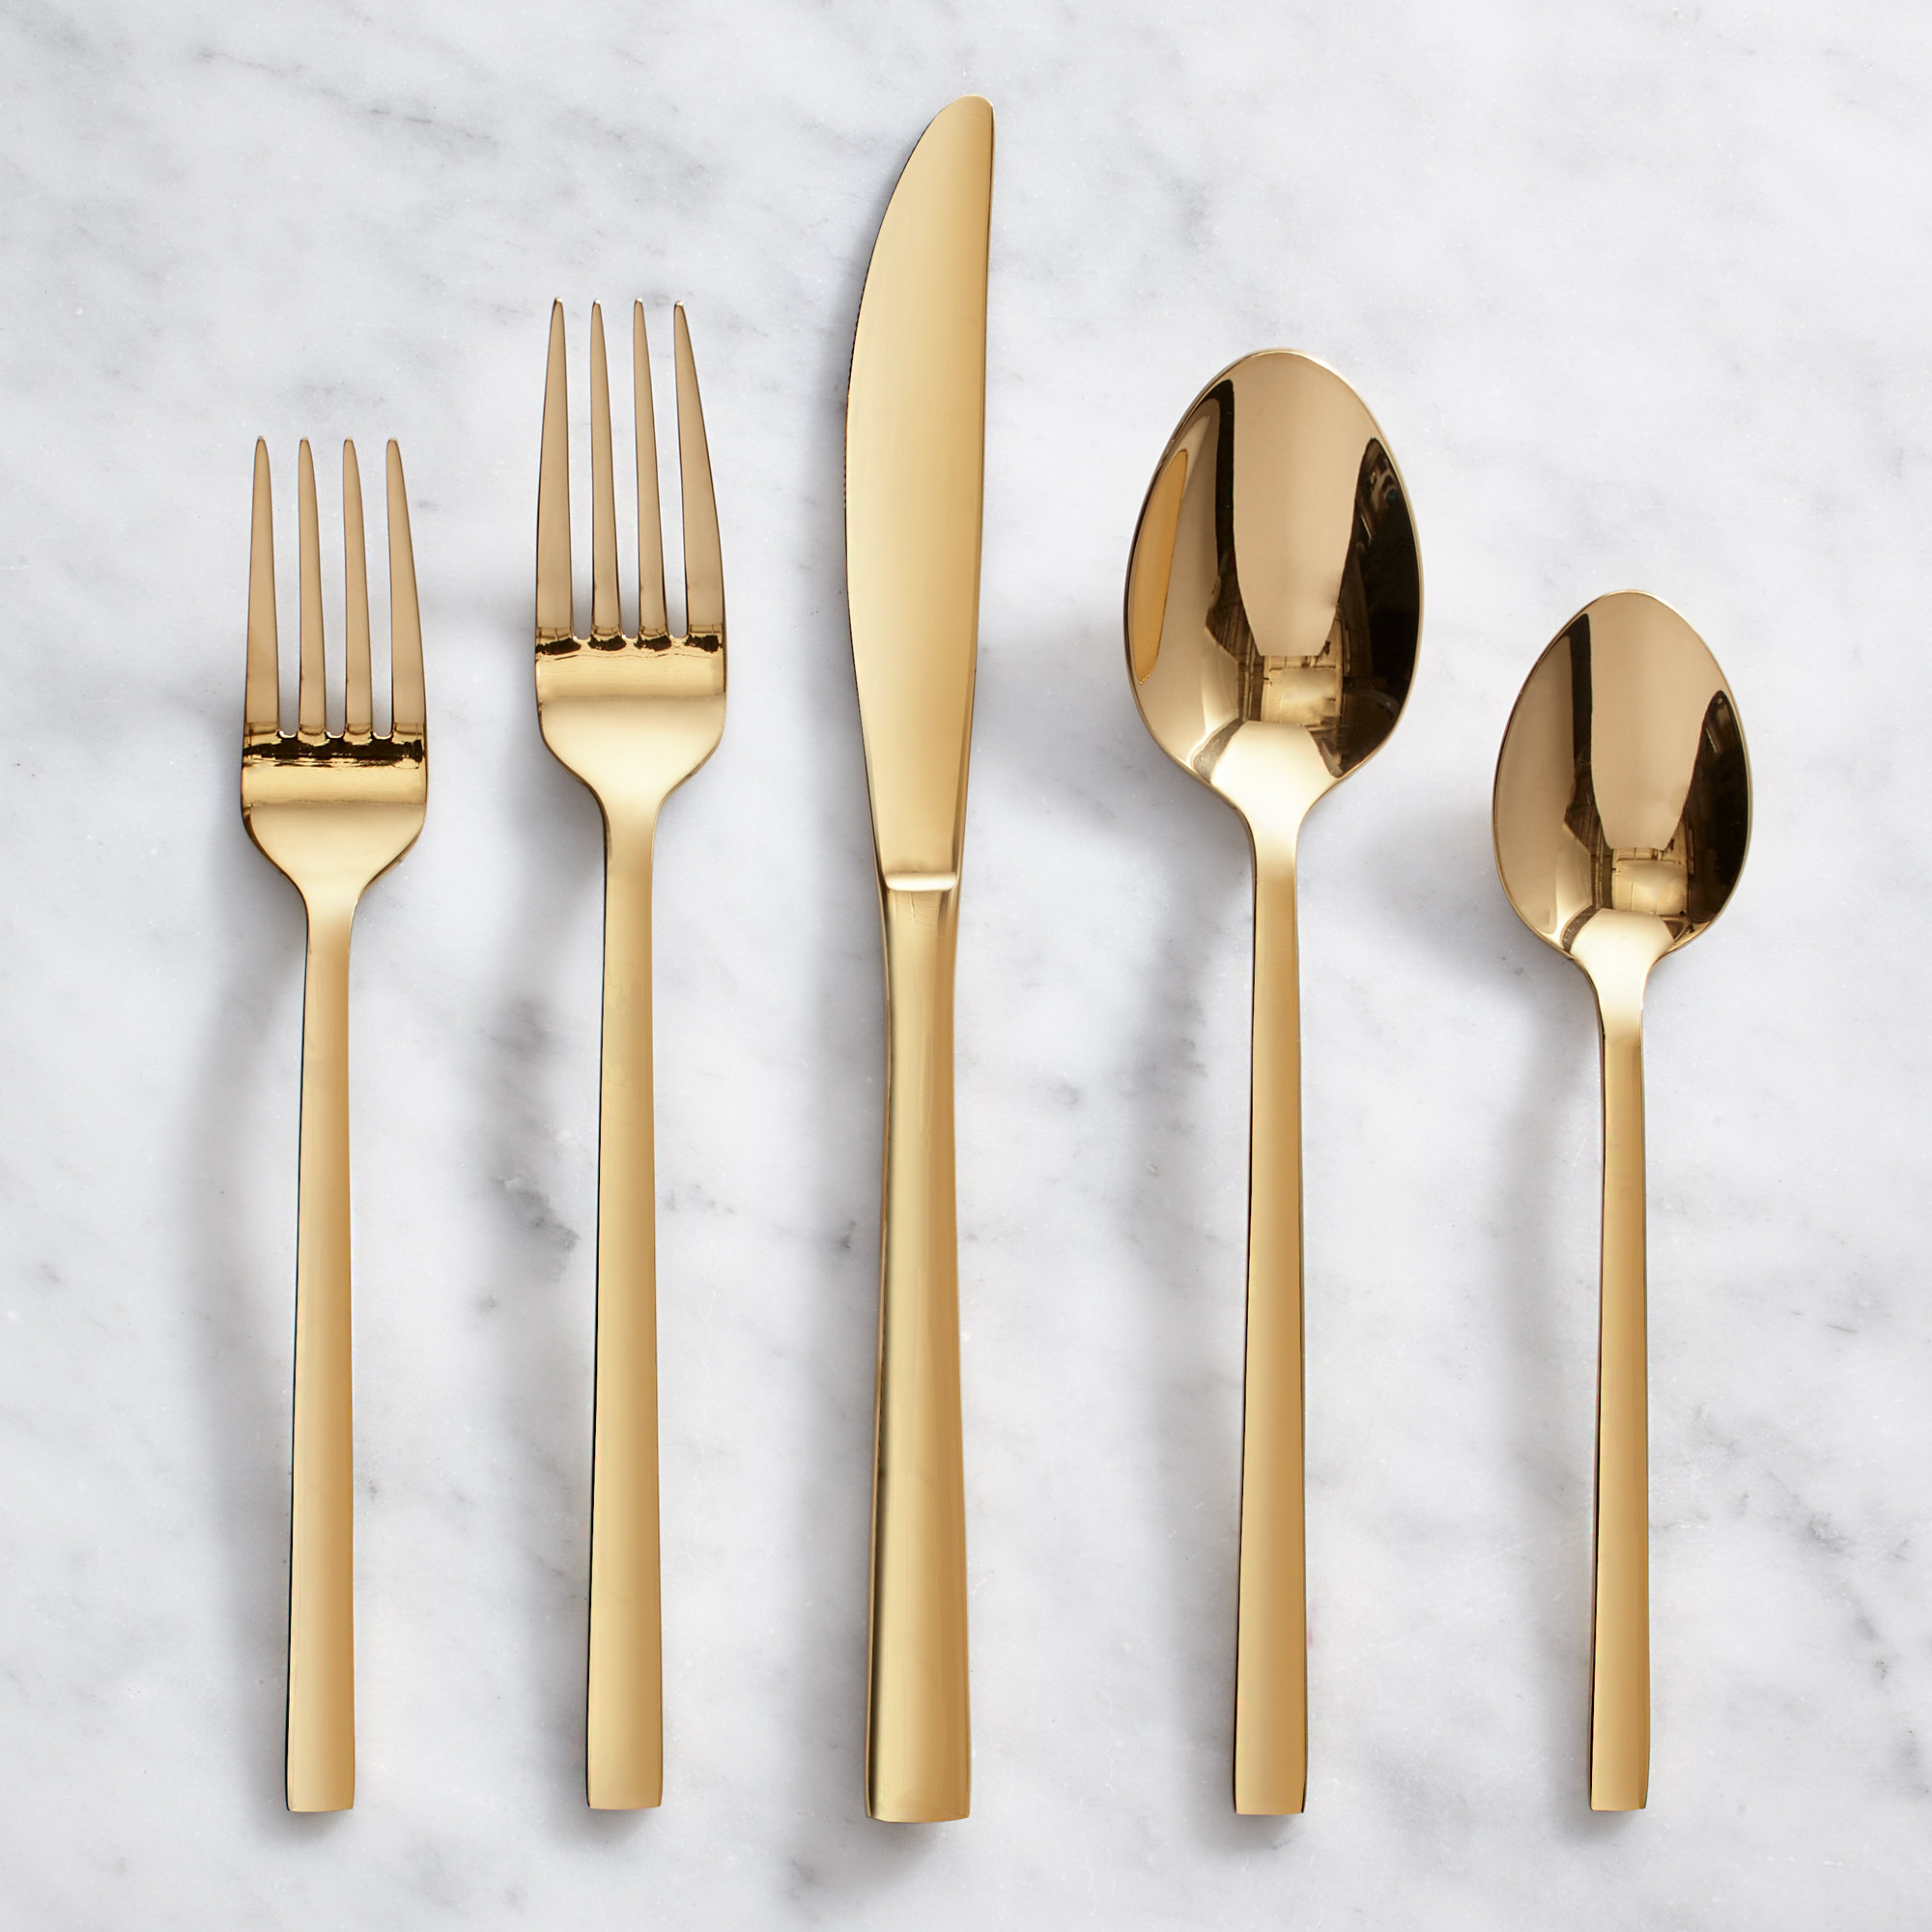 Matte Gold Silverware Set With Steak Knives,stainless Steel Gold Flatware  Set,16 Pcs Set Cutlery Utensils Set Service For 4,spoons And Forks Set